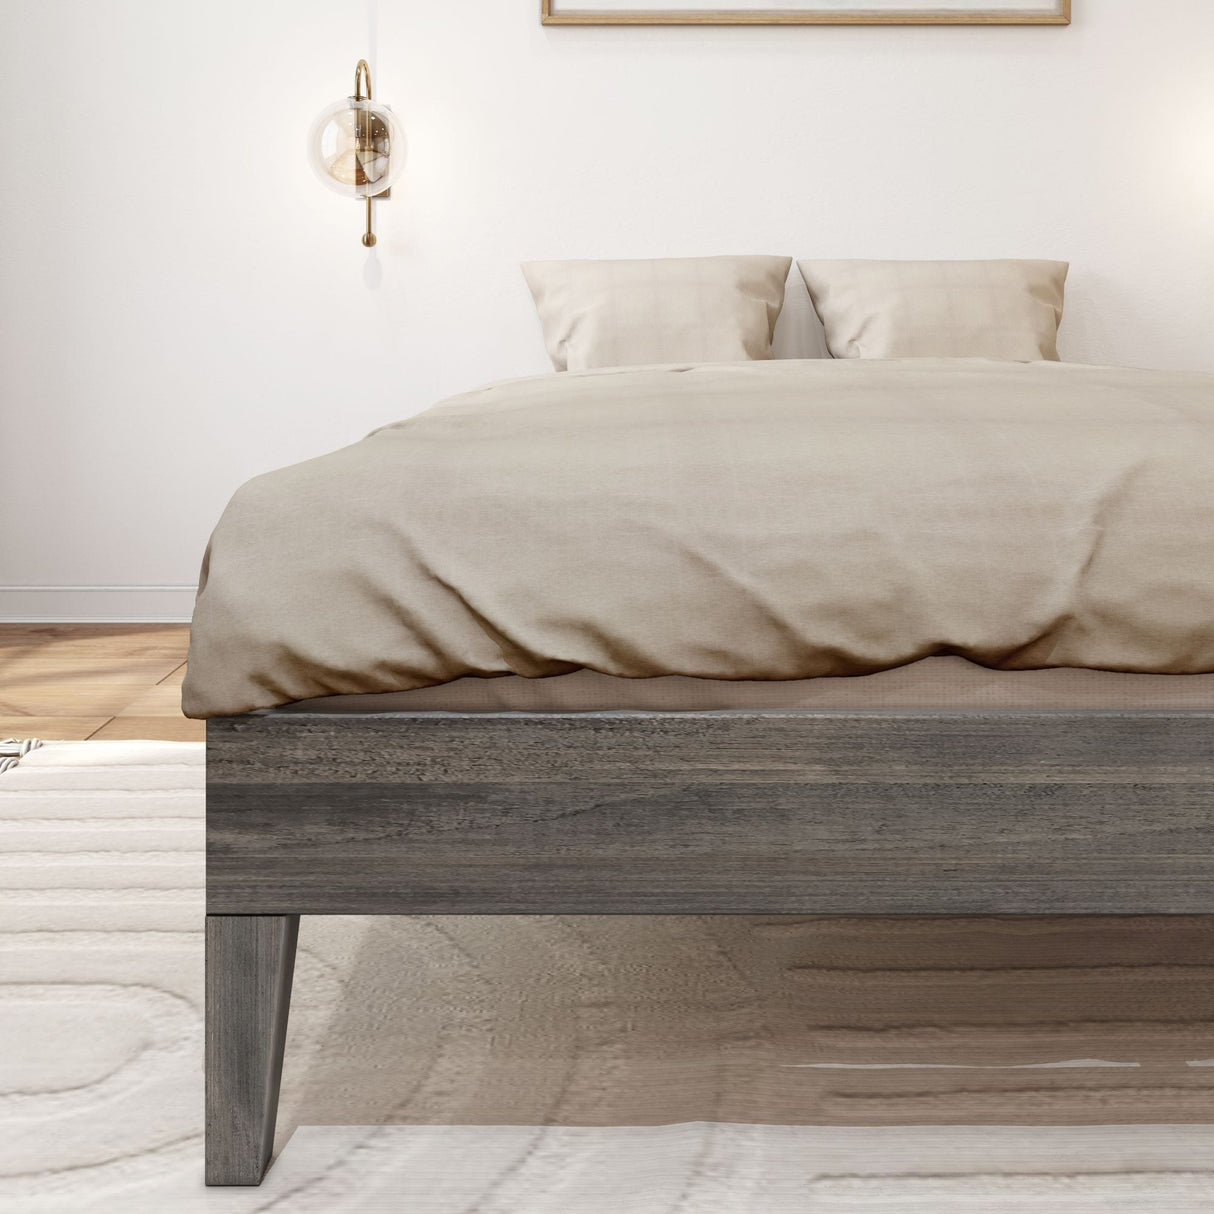 Plank and Beam Full-Size Platform Bed